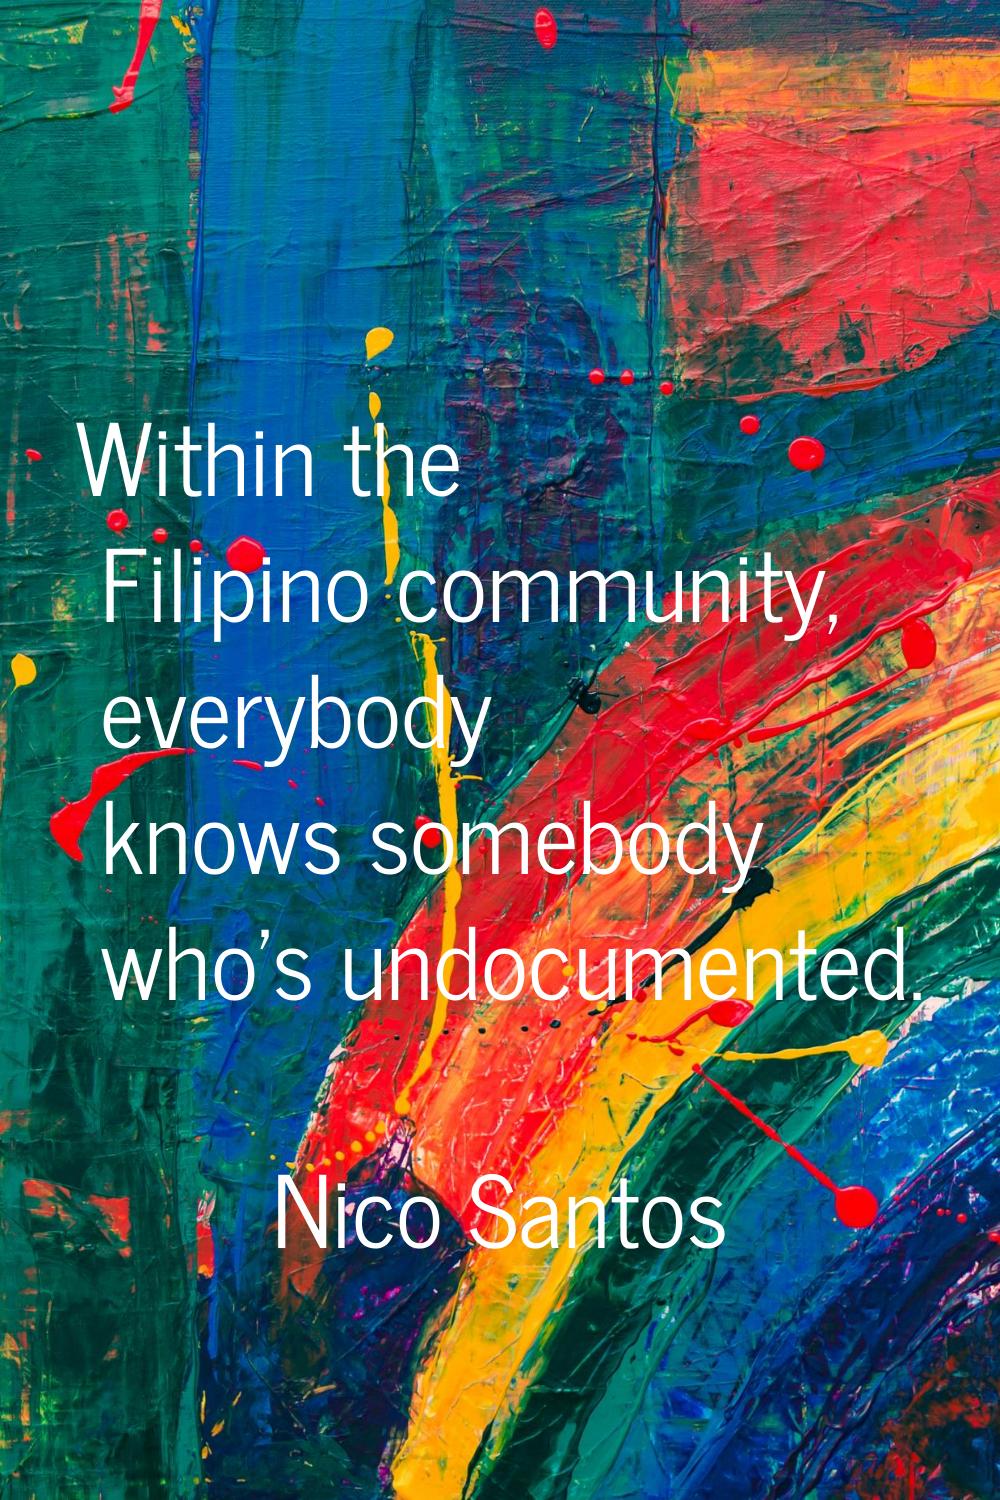 Within the Filipino community, everybody knows somebody who's undocumented.